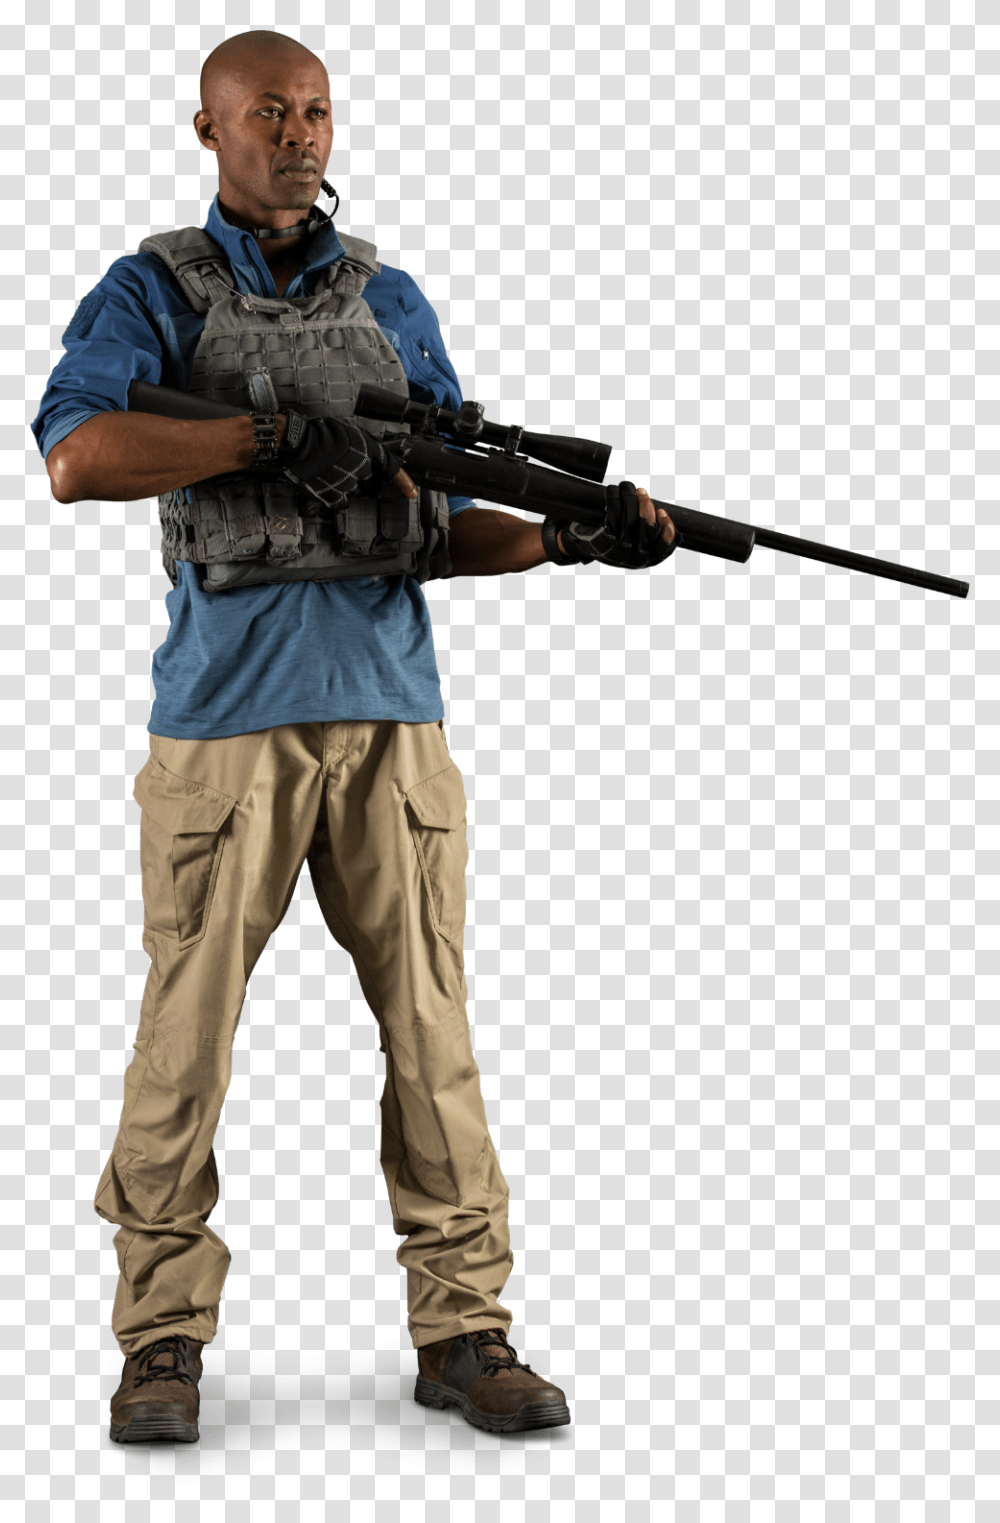 Nomad Profile View Nomad Ghost Recon Wildlands, Person, Human, Gun, Weapon Transparent Png